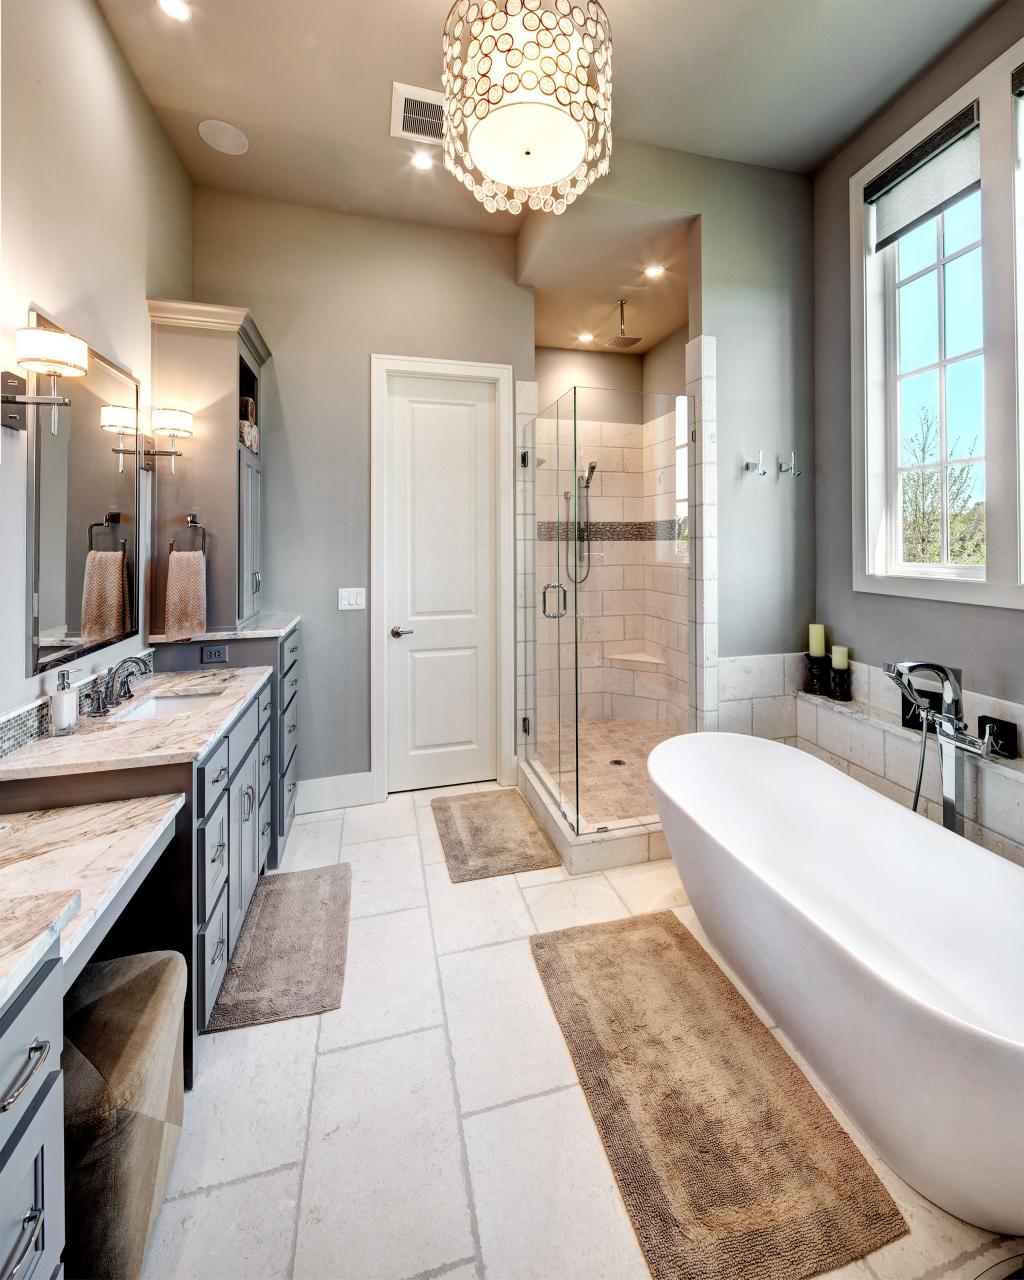 Large master bathroom with double vanities. Large tub under window